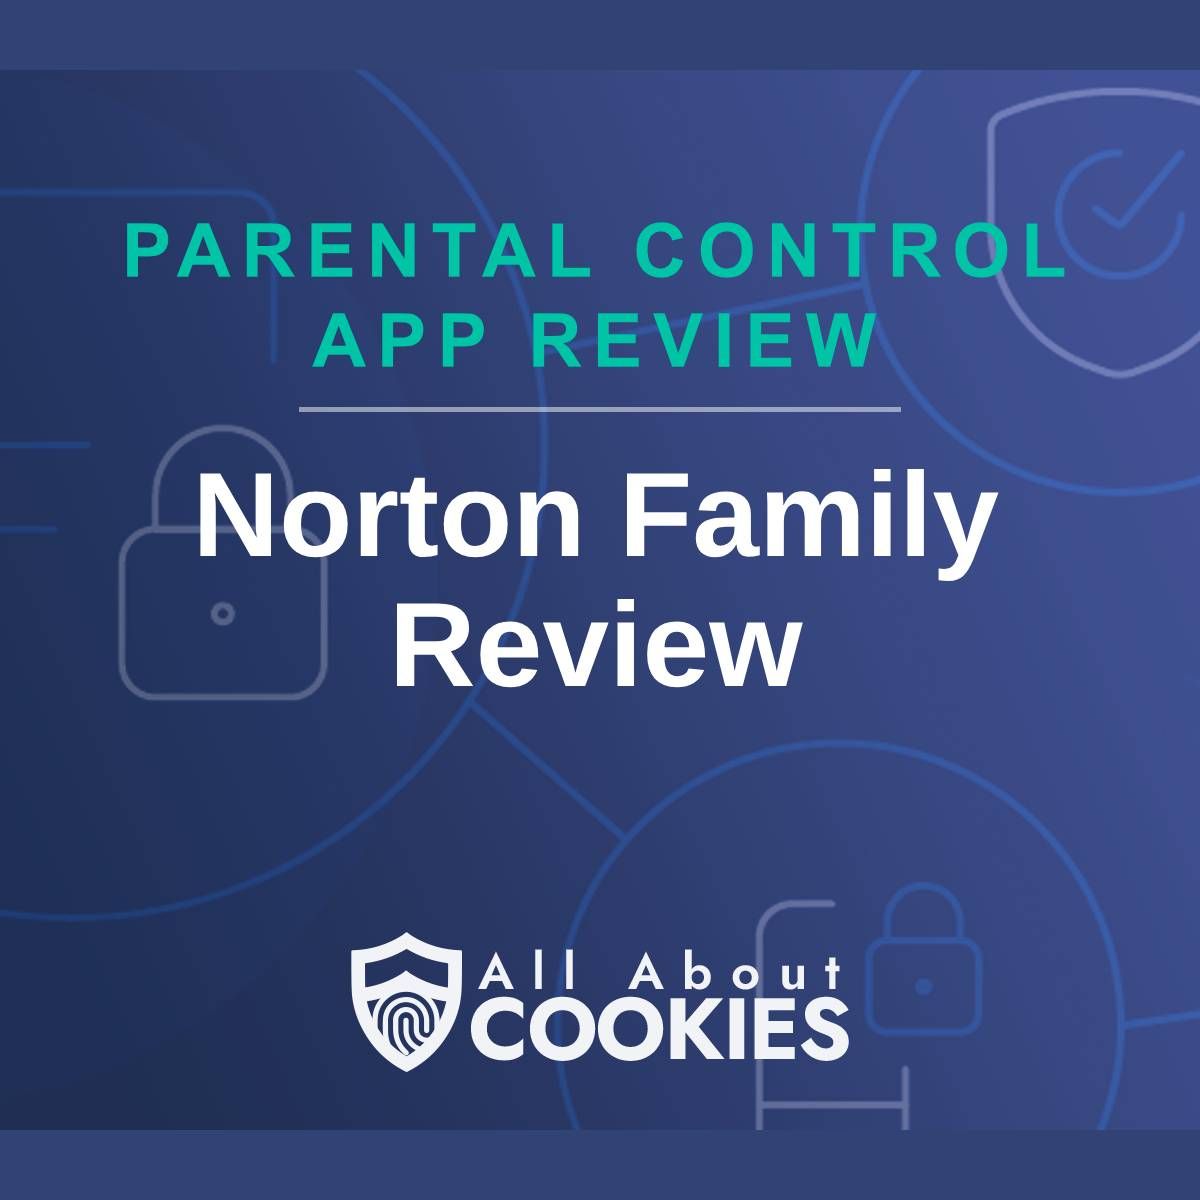 A blue background with images of locks and shields with the text &quot;Parental Control App Review Norton Family Review&quot; and the All About Cookies logo.